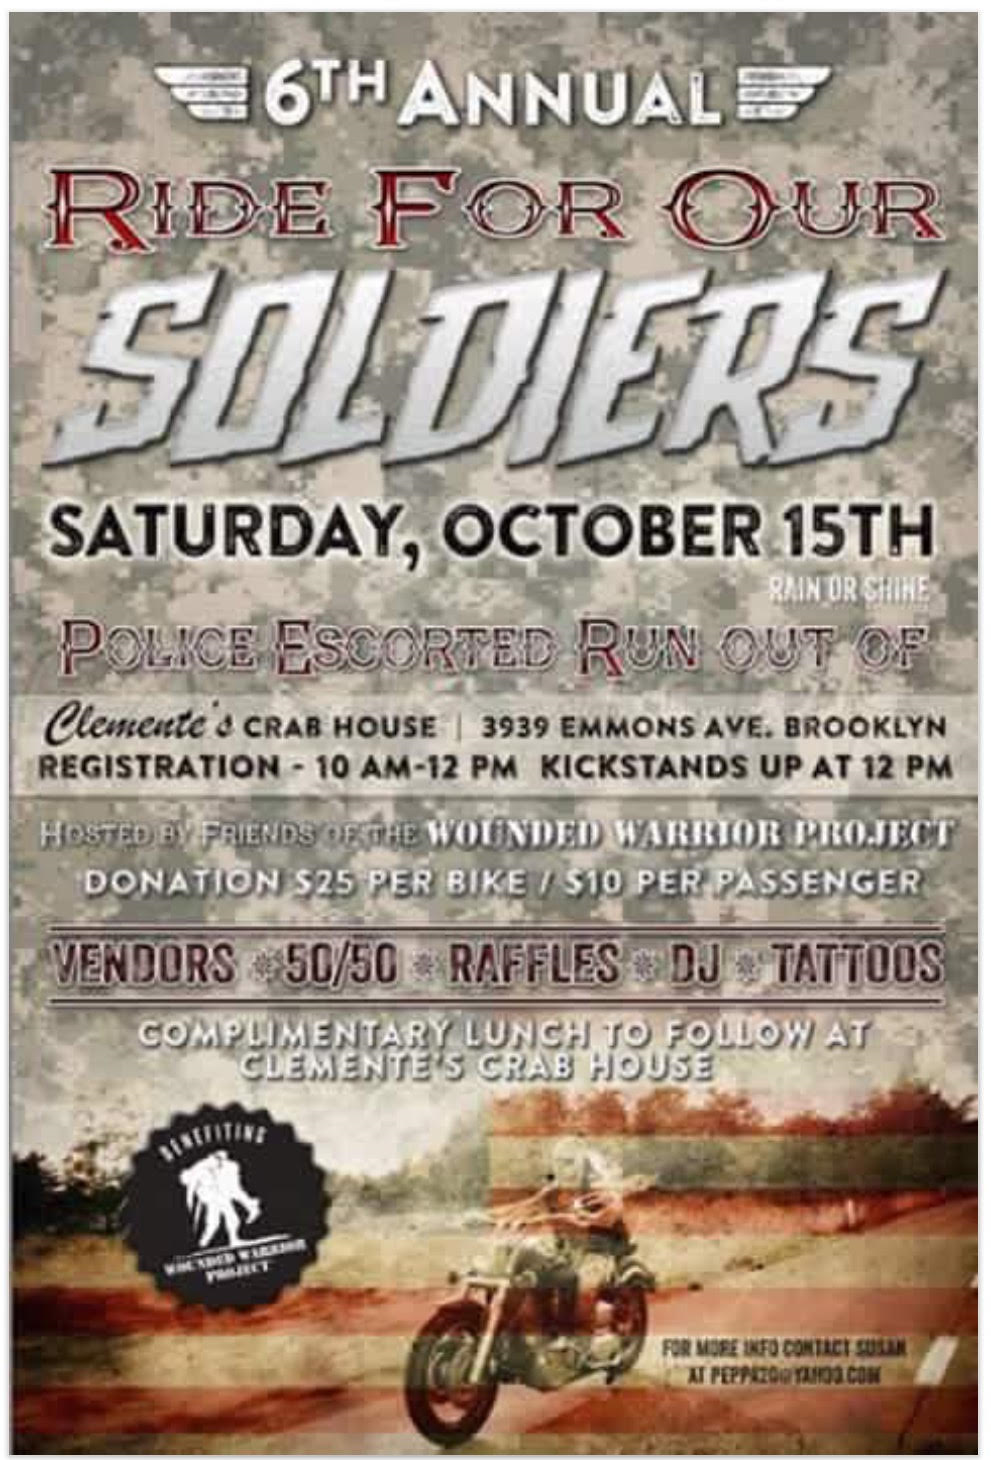 6th Annual Ride For Our Soldiers